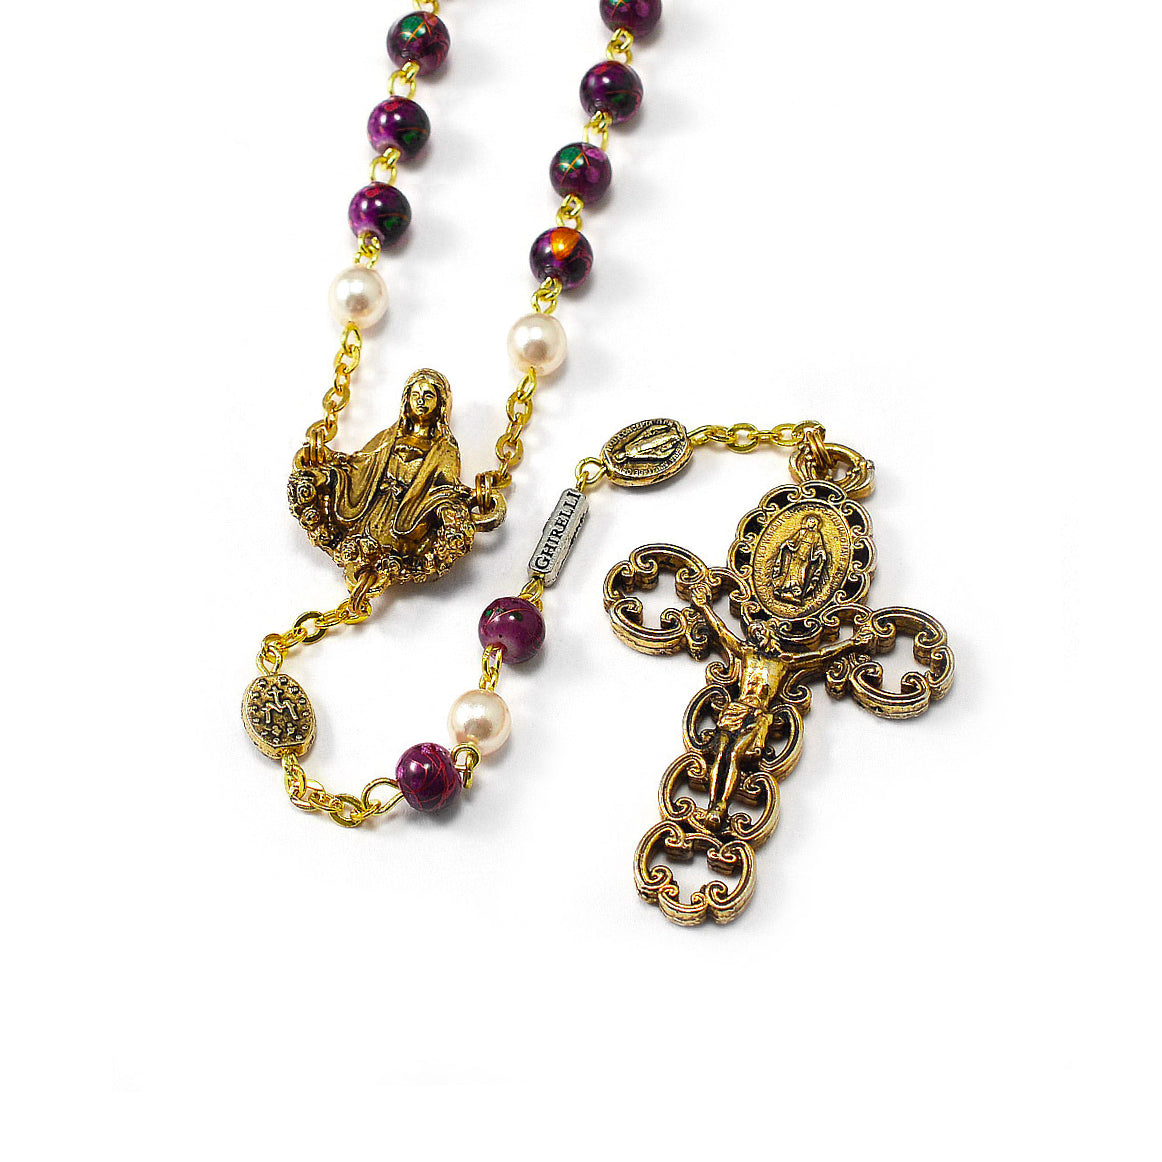 Our Lady of the Miraculous Medal Rosary in Burgundy & Antique Gold